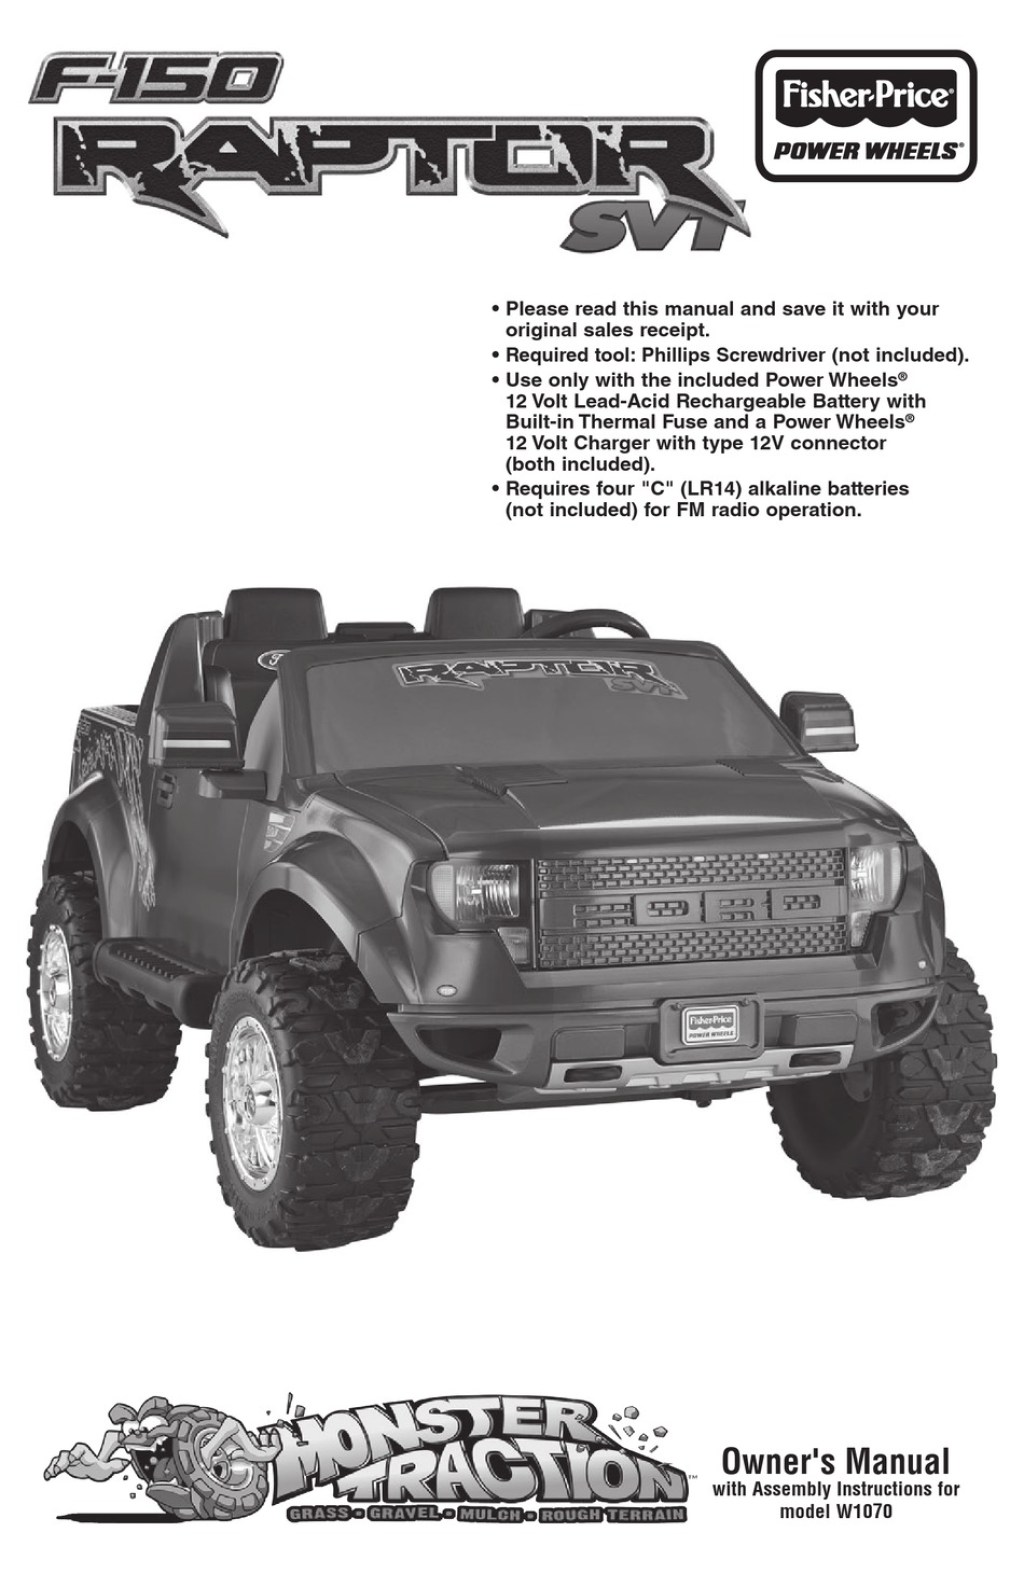 Picture of: Ford Raptor Power Wheels Manual Sale, SAVE % – horiconphoenix